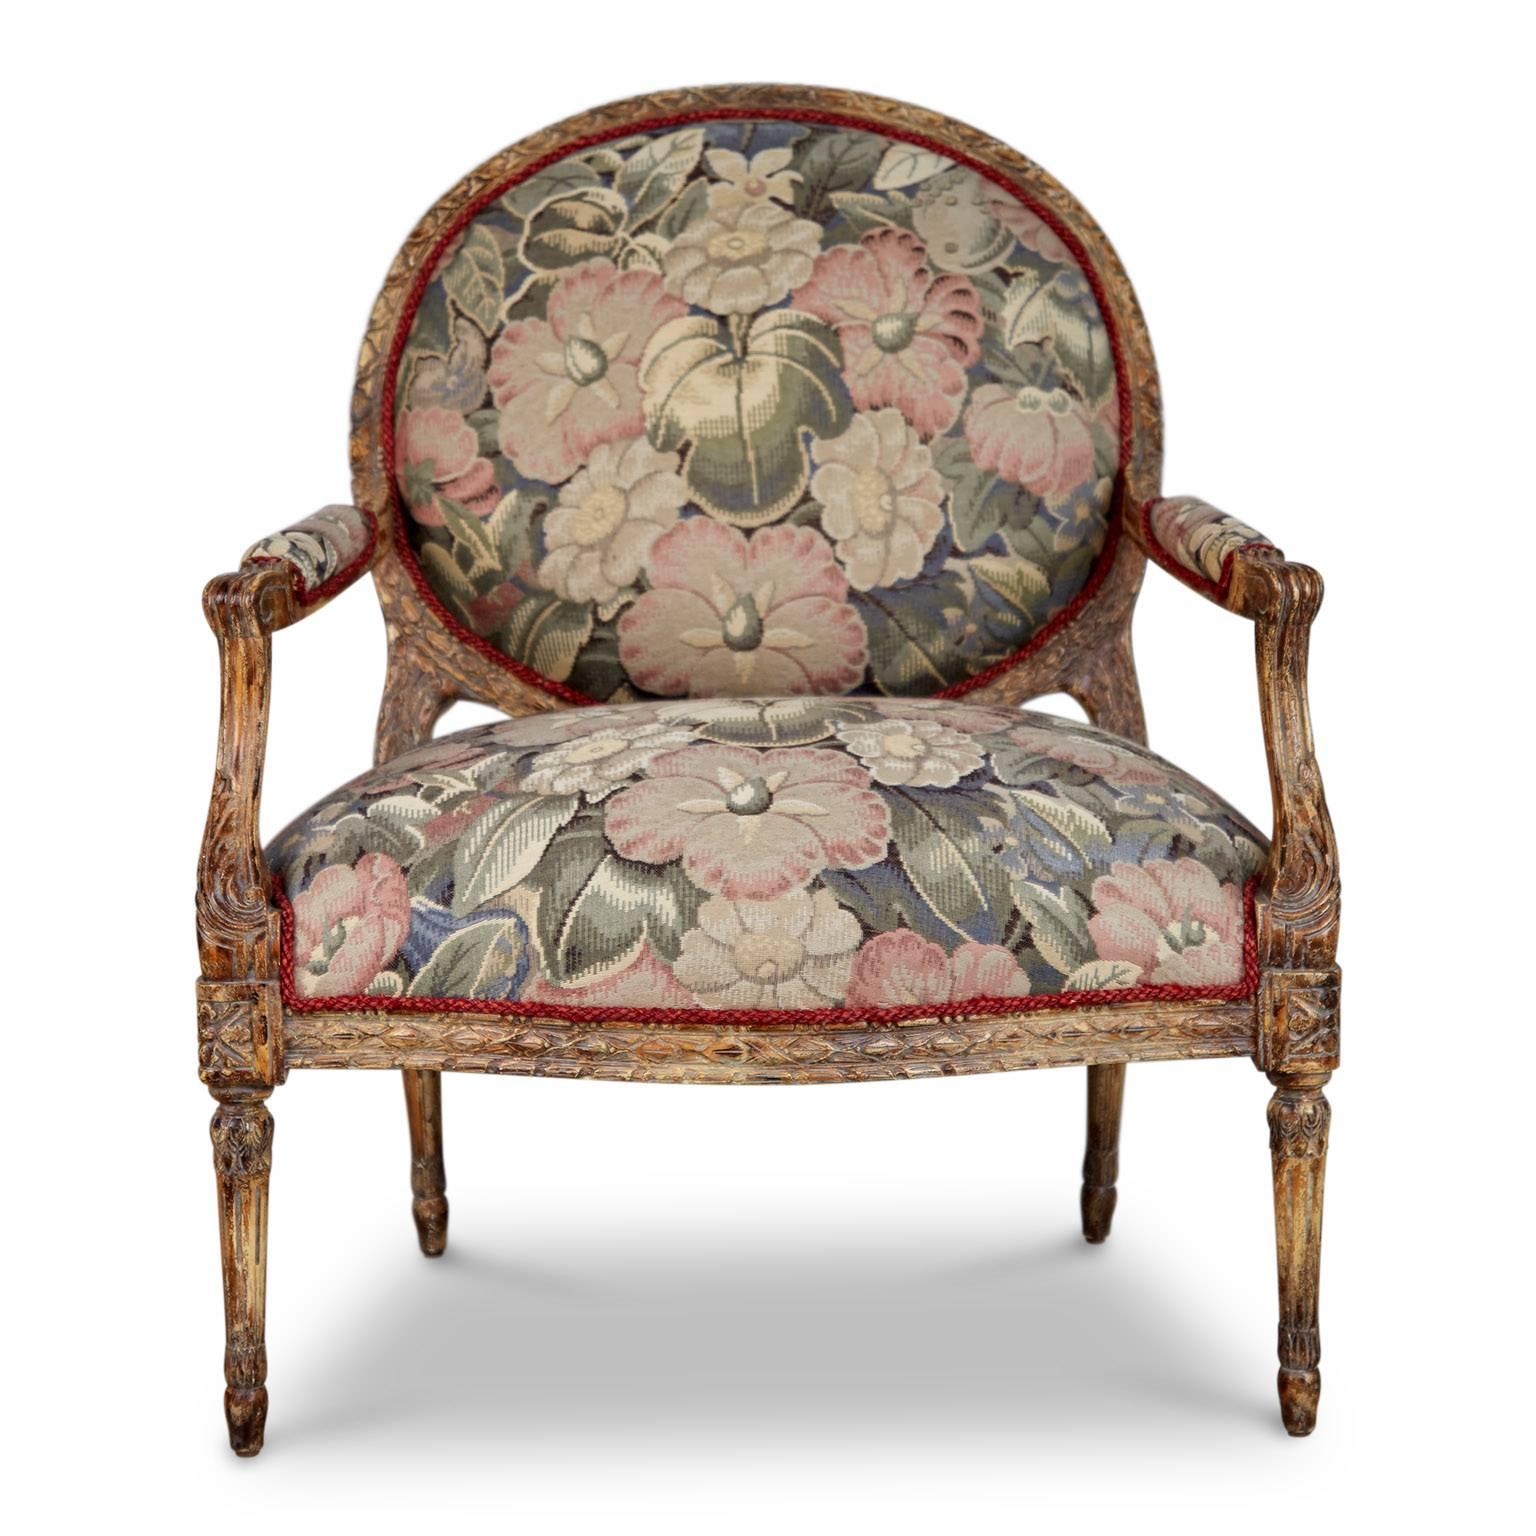 Add a touch of elegance to your surroundings with this pair of high quality Louis XVI style armchairs. Featuring a generously wide seat and carved faux distressed finish wood frame with details on the cresting, stiles, handhold arm, arm support,